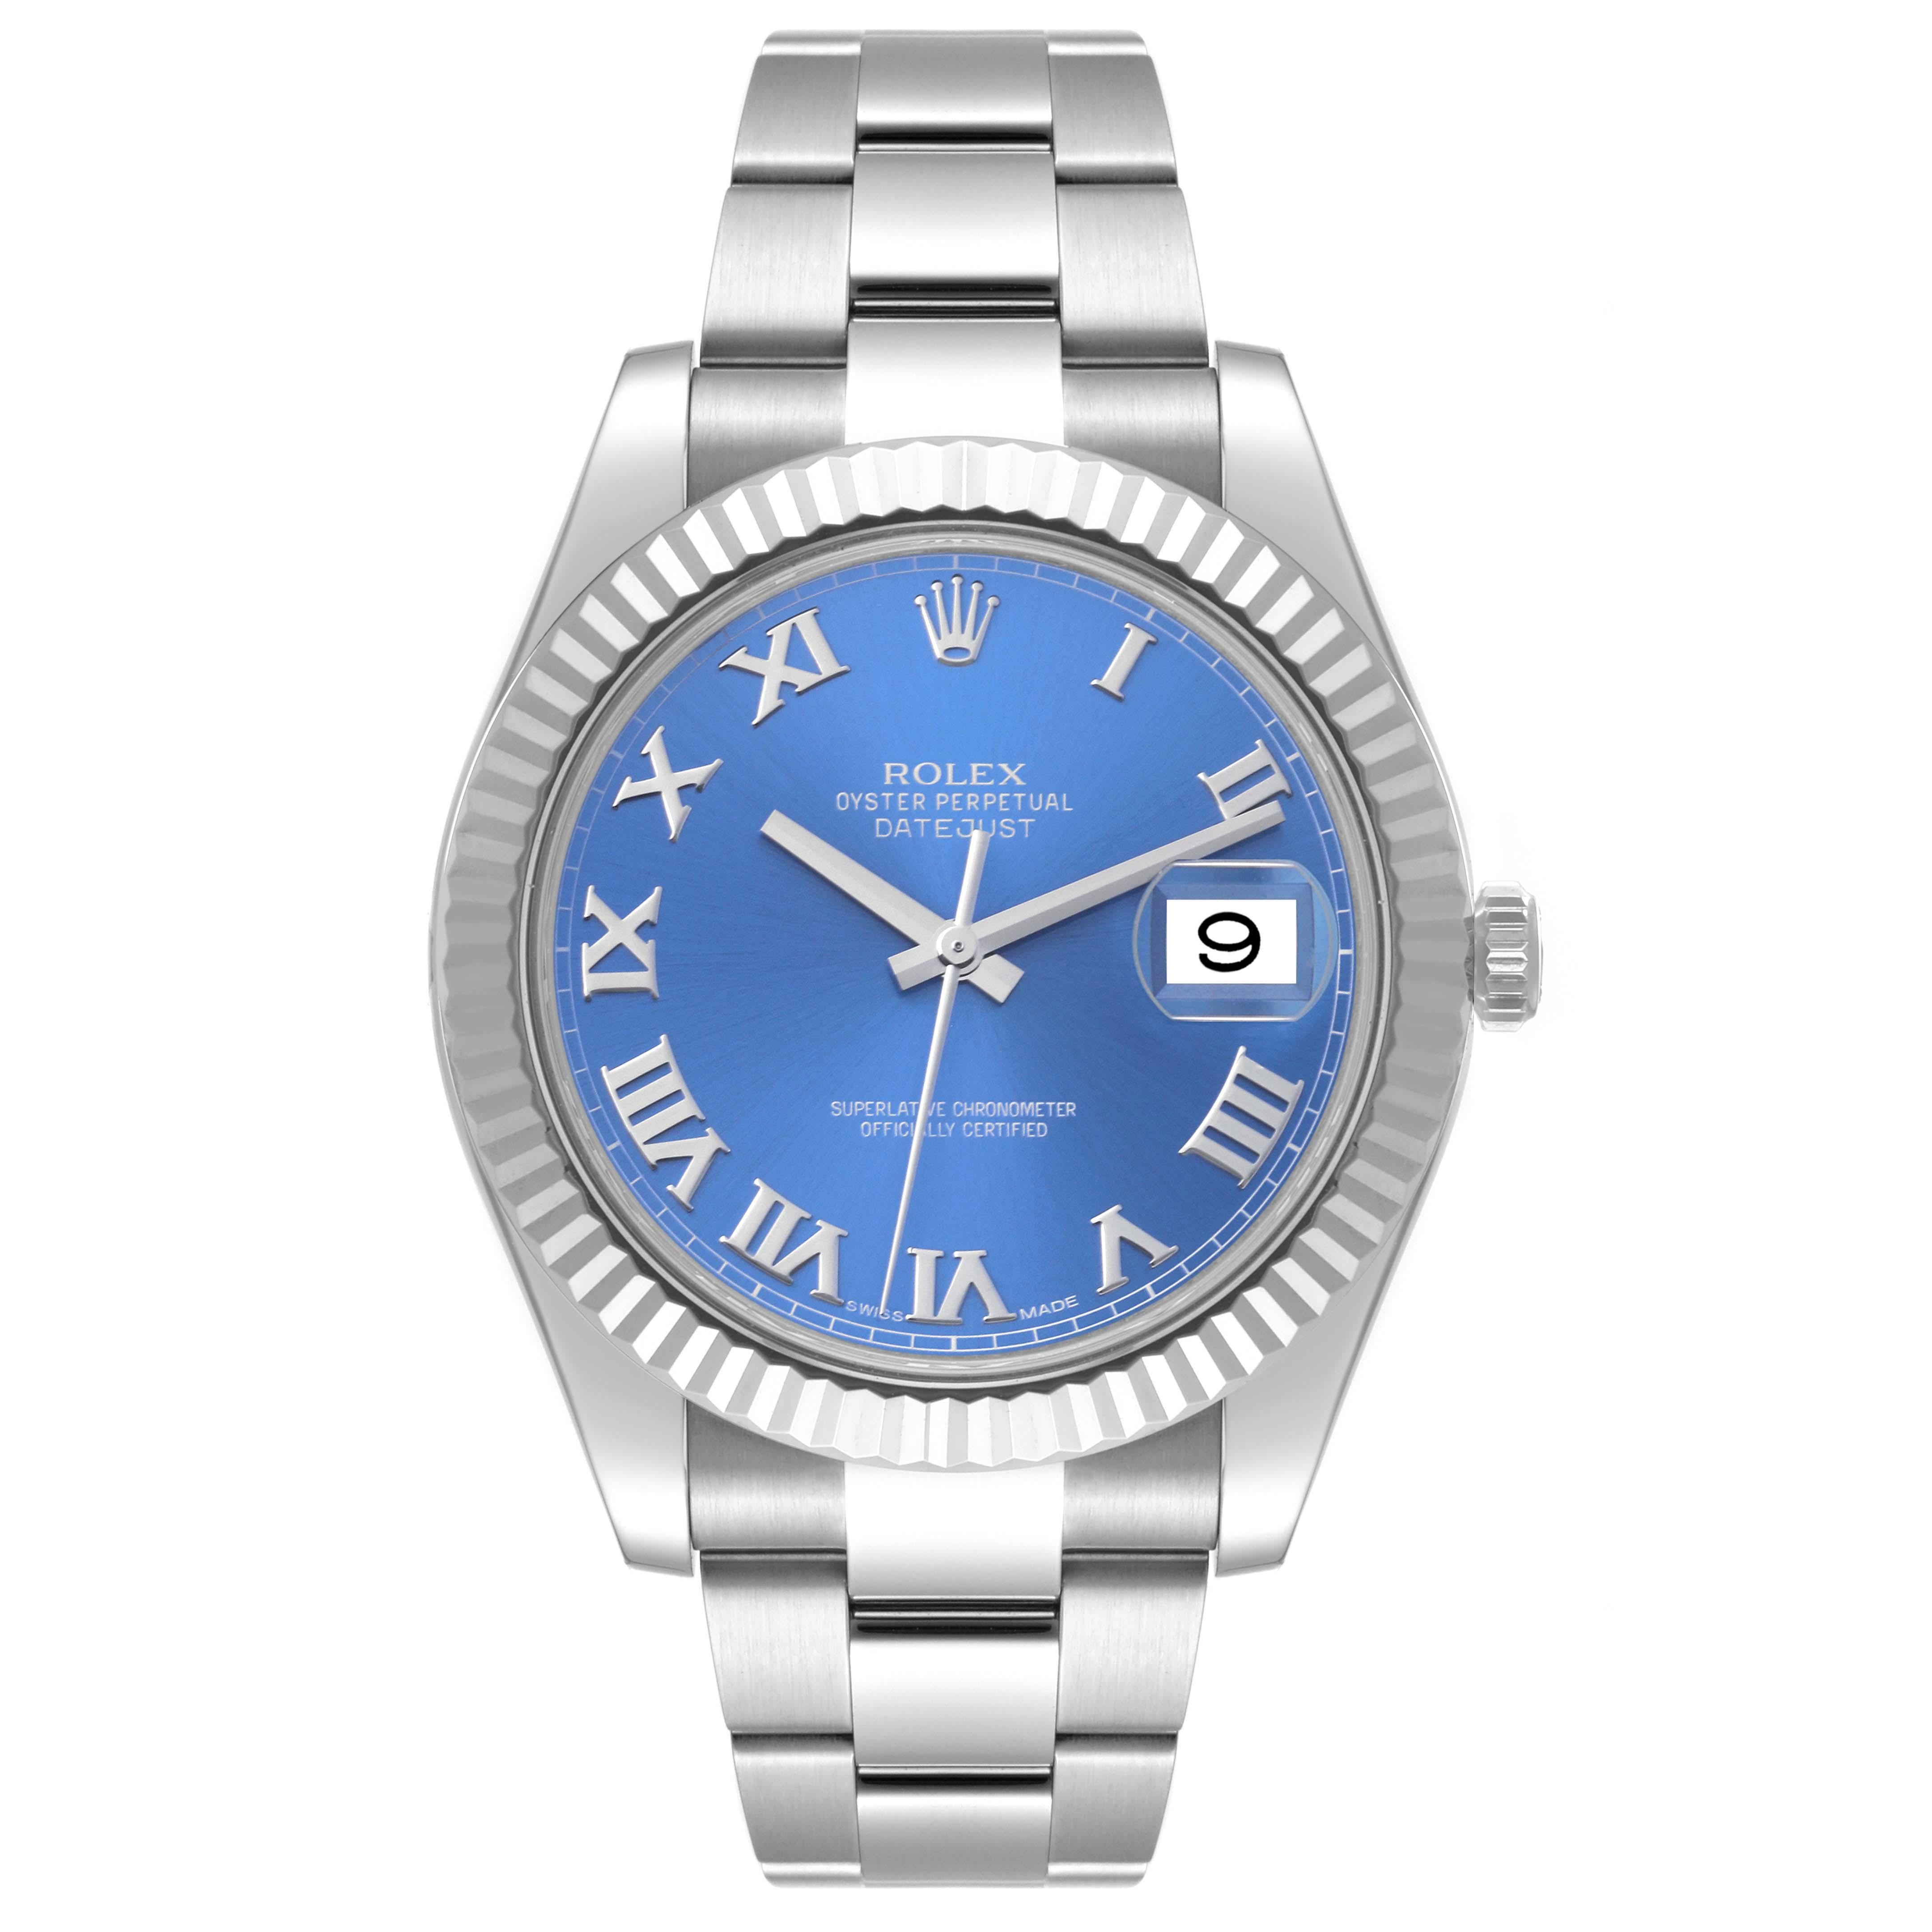 Rolex Datejust II Steel White Gold Blue Roman Dial Mens Watch 116334. Officially certified chronometer automatic self-winding movement. Stainless steel round case 41.0 mm in diameter. Rolex logo on the crown. 18k white gold fluted bezel. Scratch